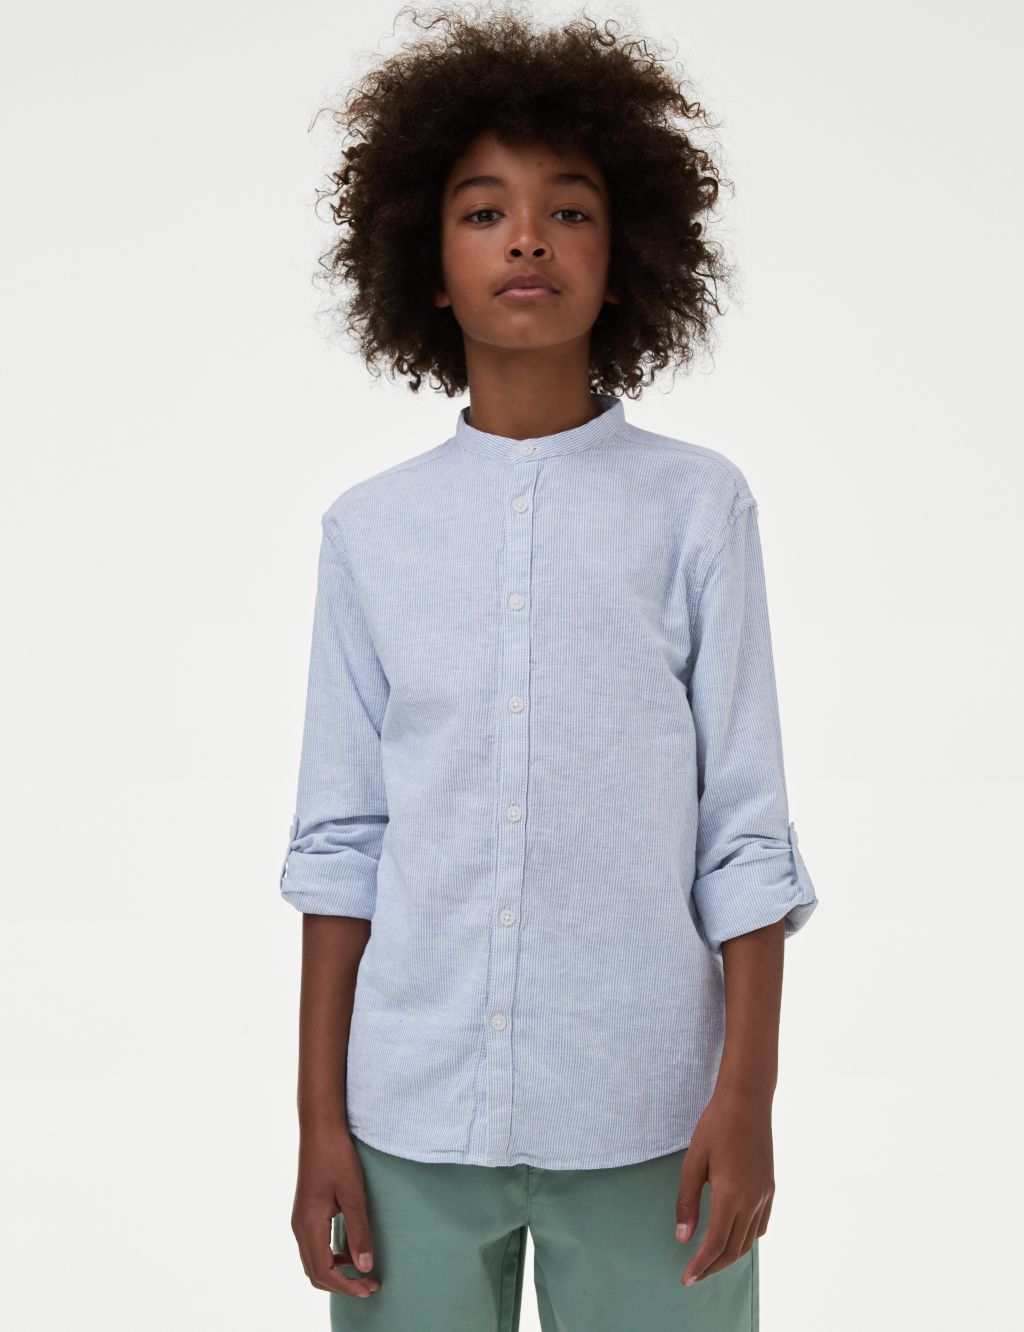 Cotton Rich Textured Shirt (6-16 Years) image 1